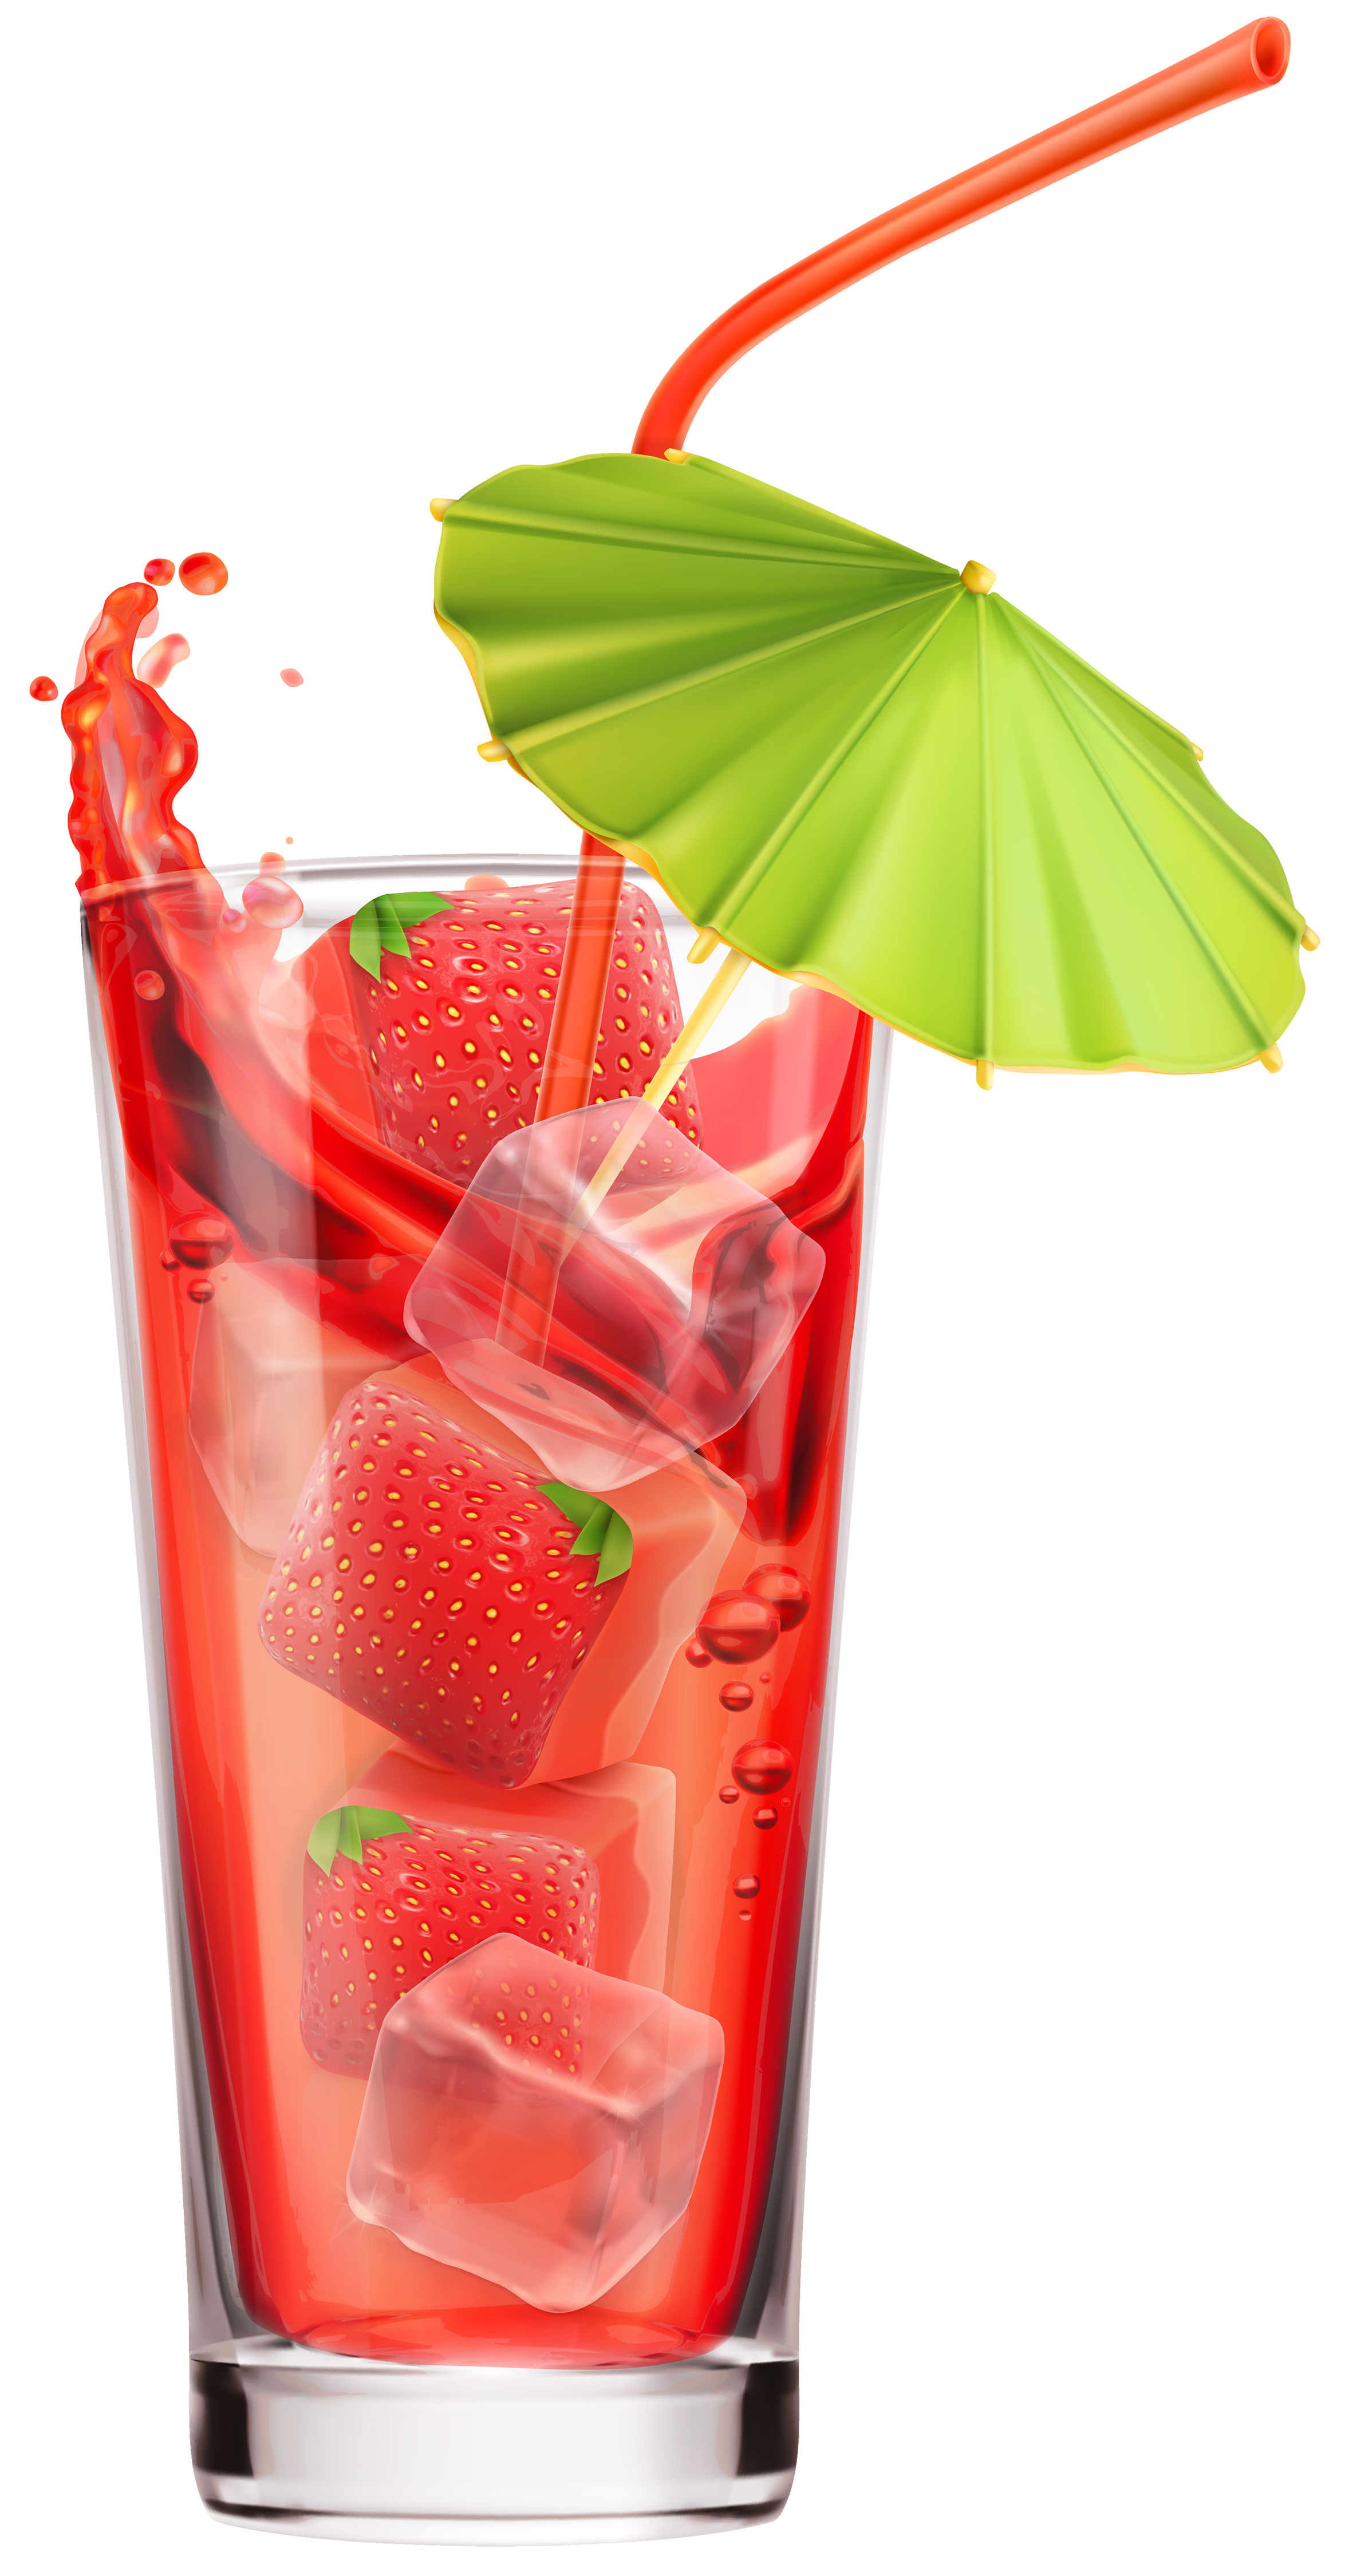 Strawberry Cocktail Png Clipart Image - Cocktail, Transparent background PNG HD thumbnail